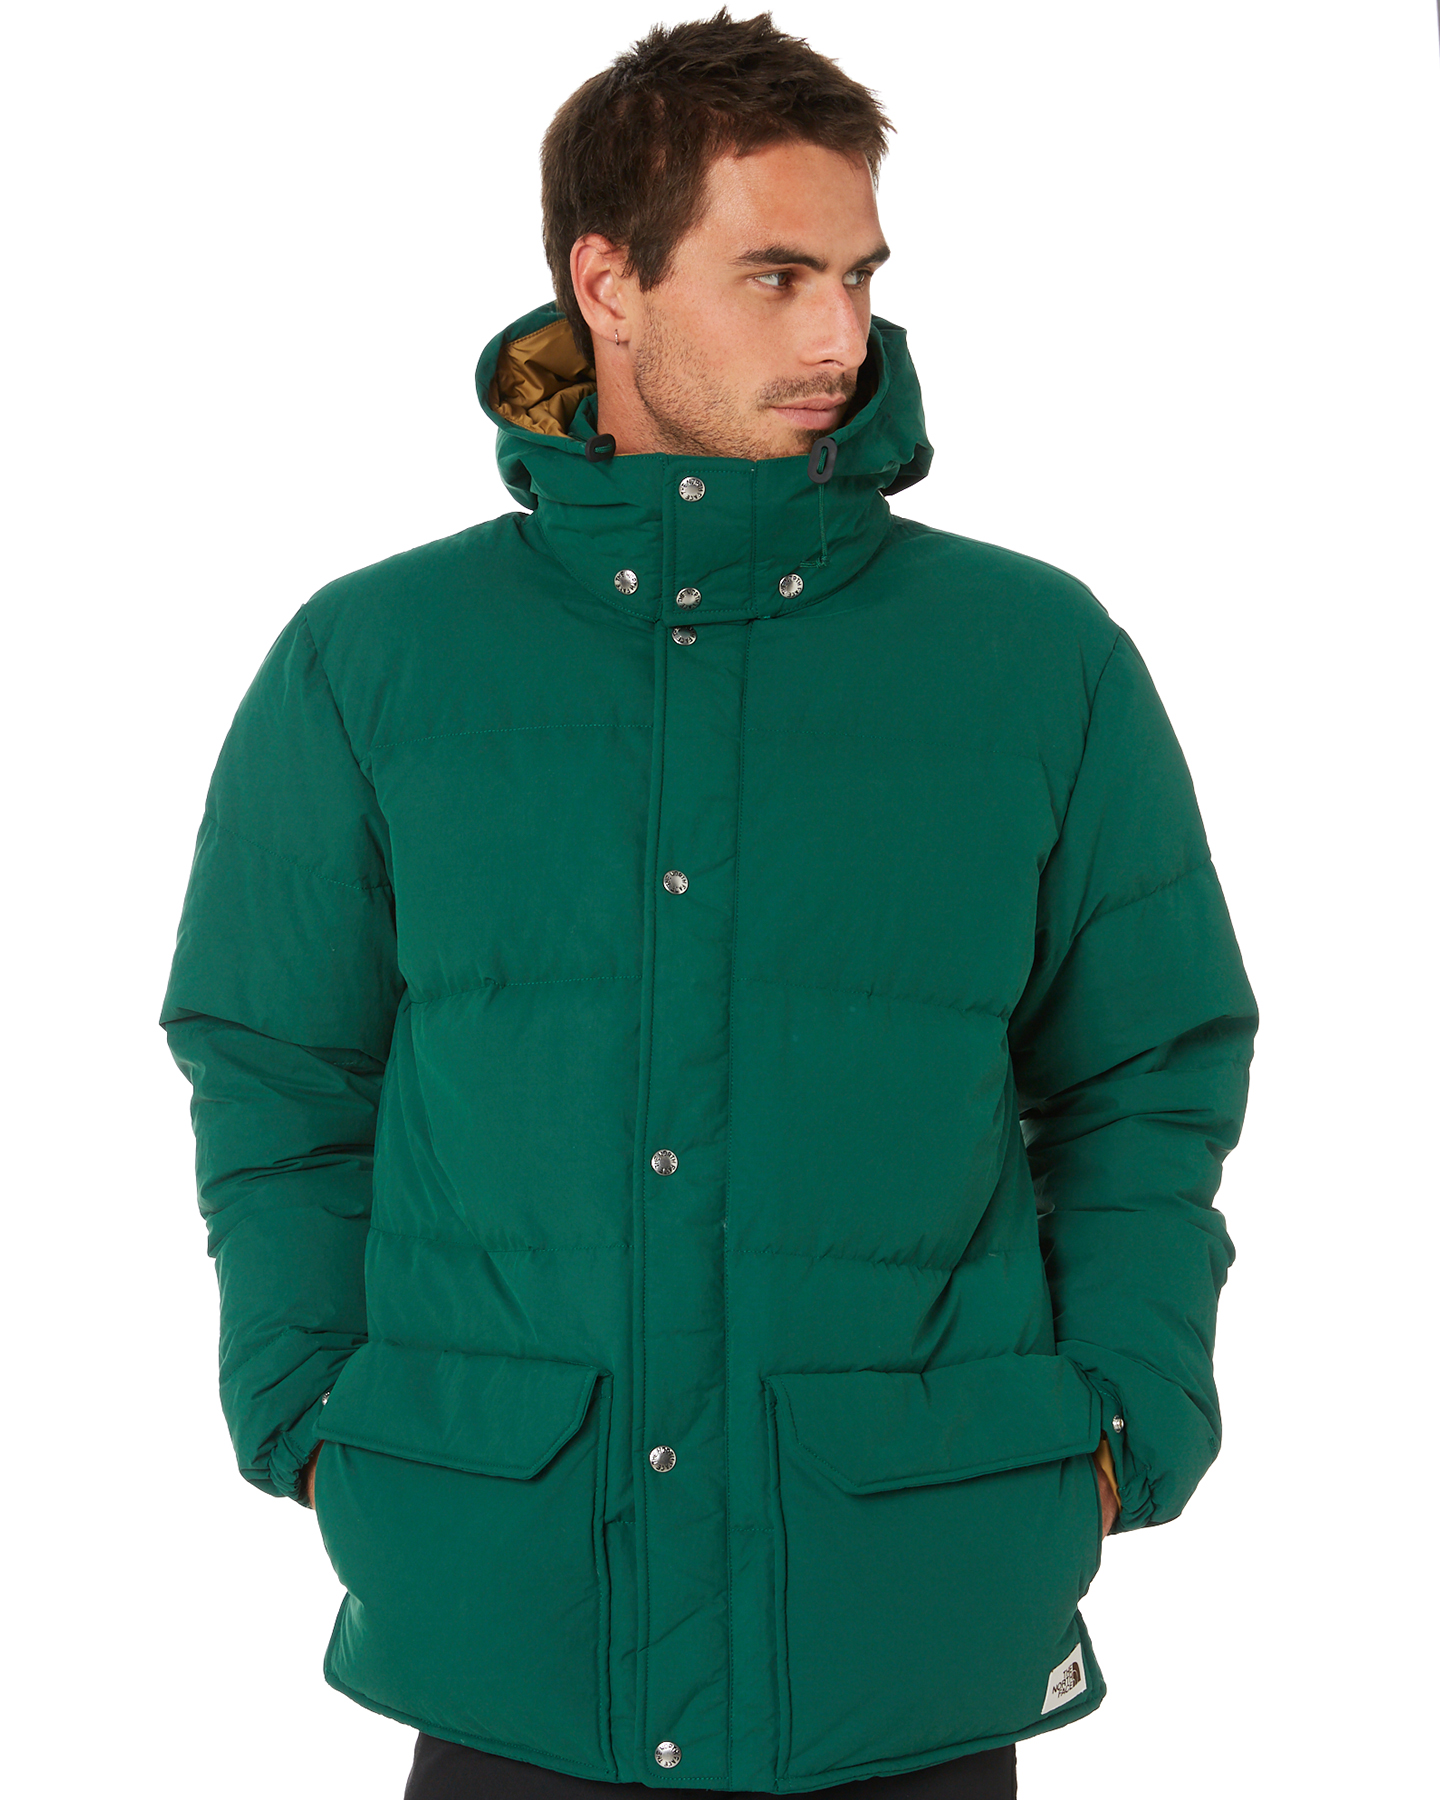 north face men's clothing clearance